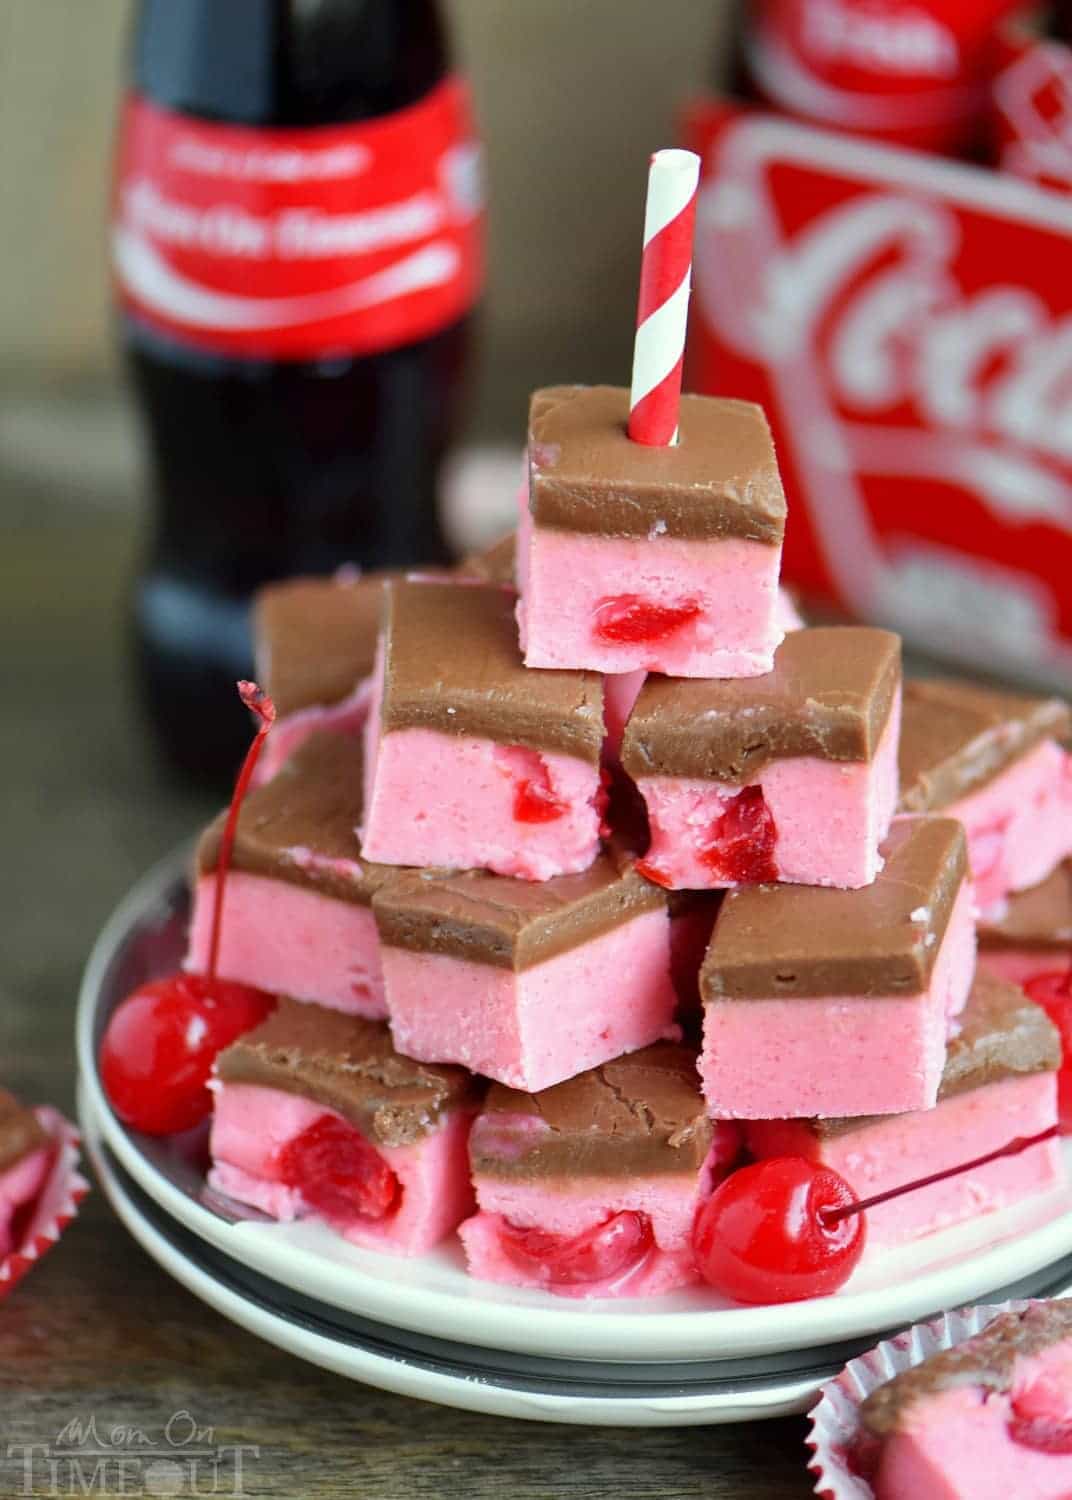 Because we can... Cherry Coke Fudge! A decadent cherry fudge topped with a Coca-Cola chocolate frosting! This irresistible fudge is sure to be a hit this holiday season! // Mom On Timeout